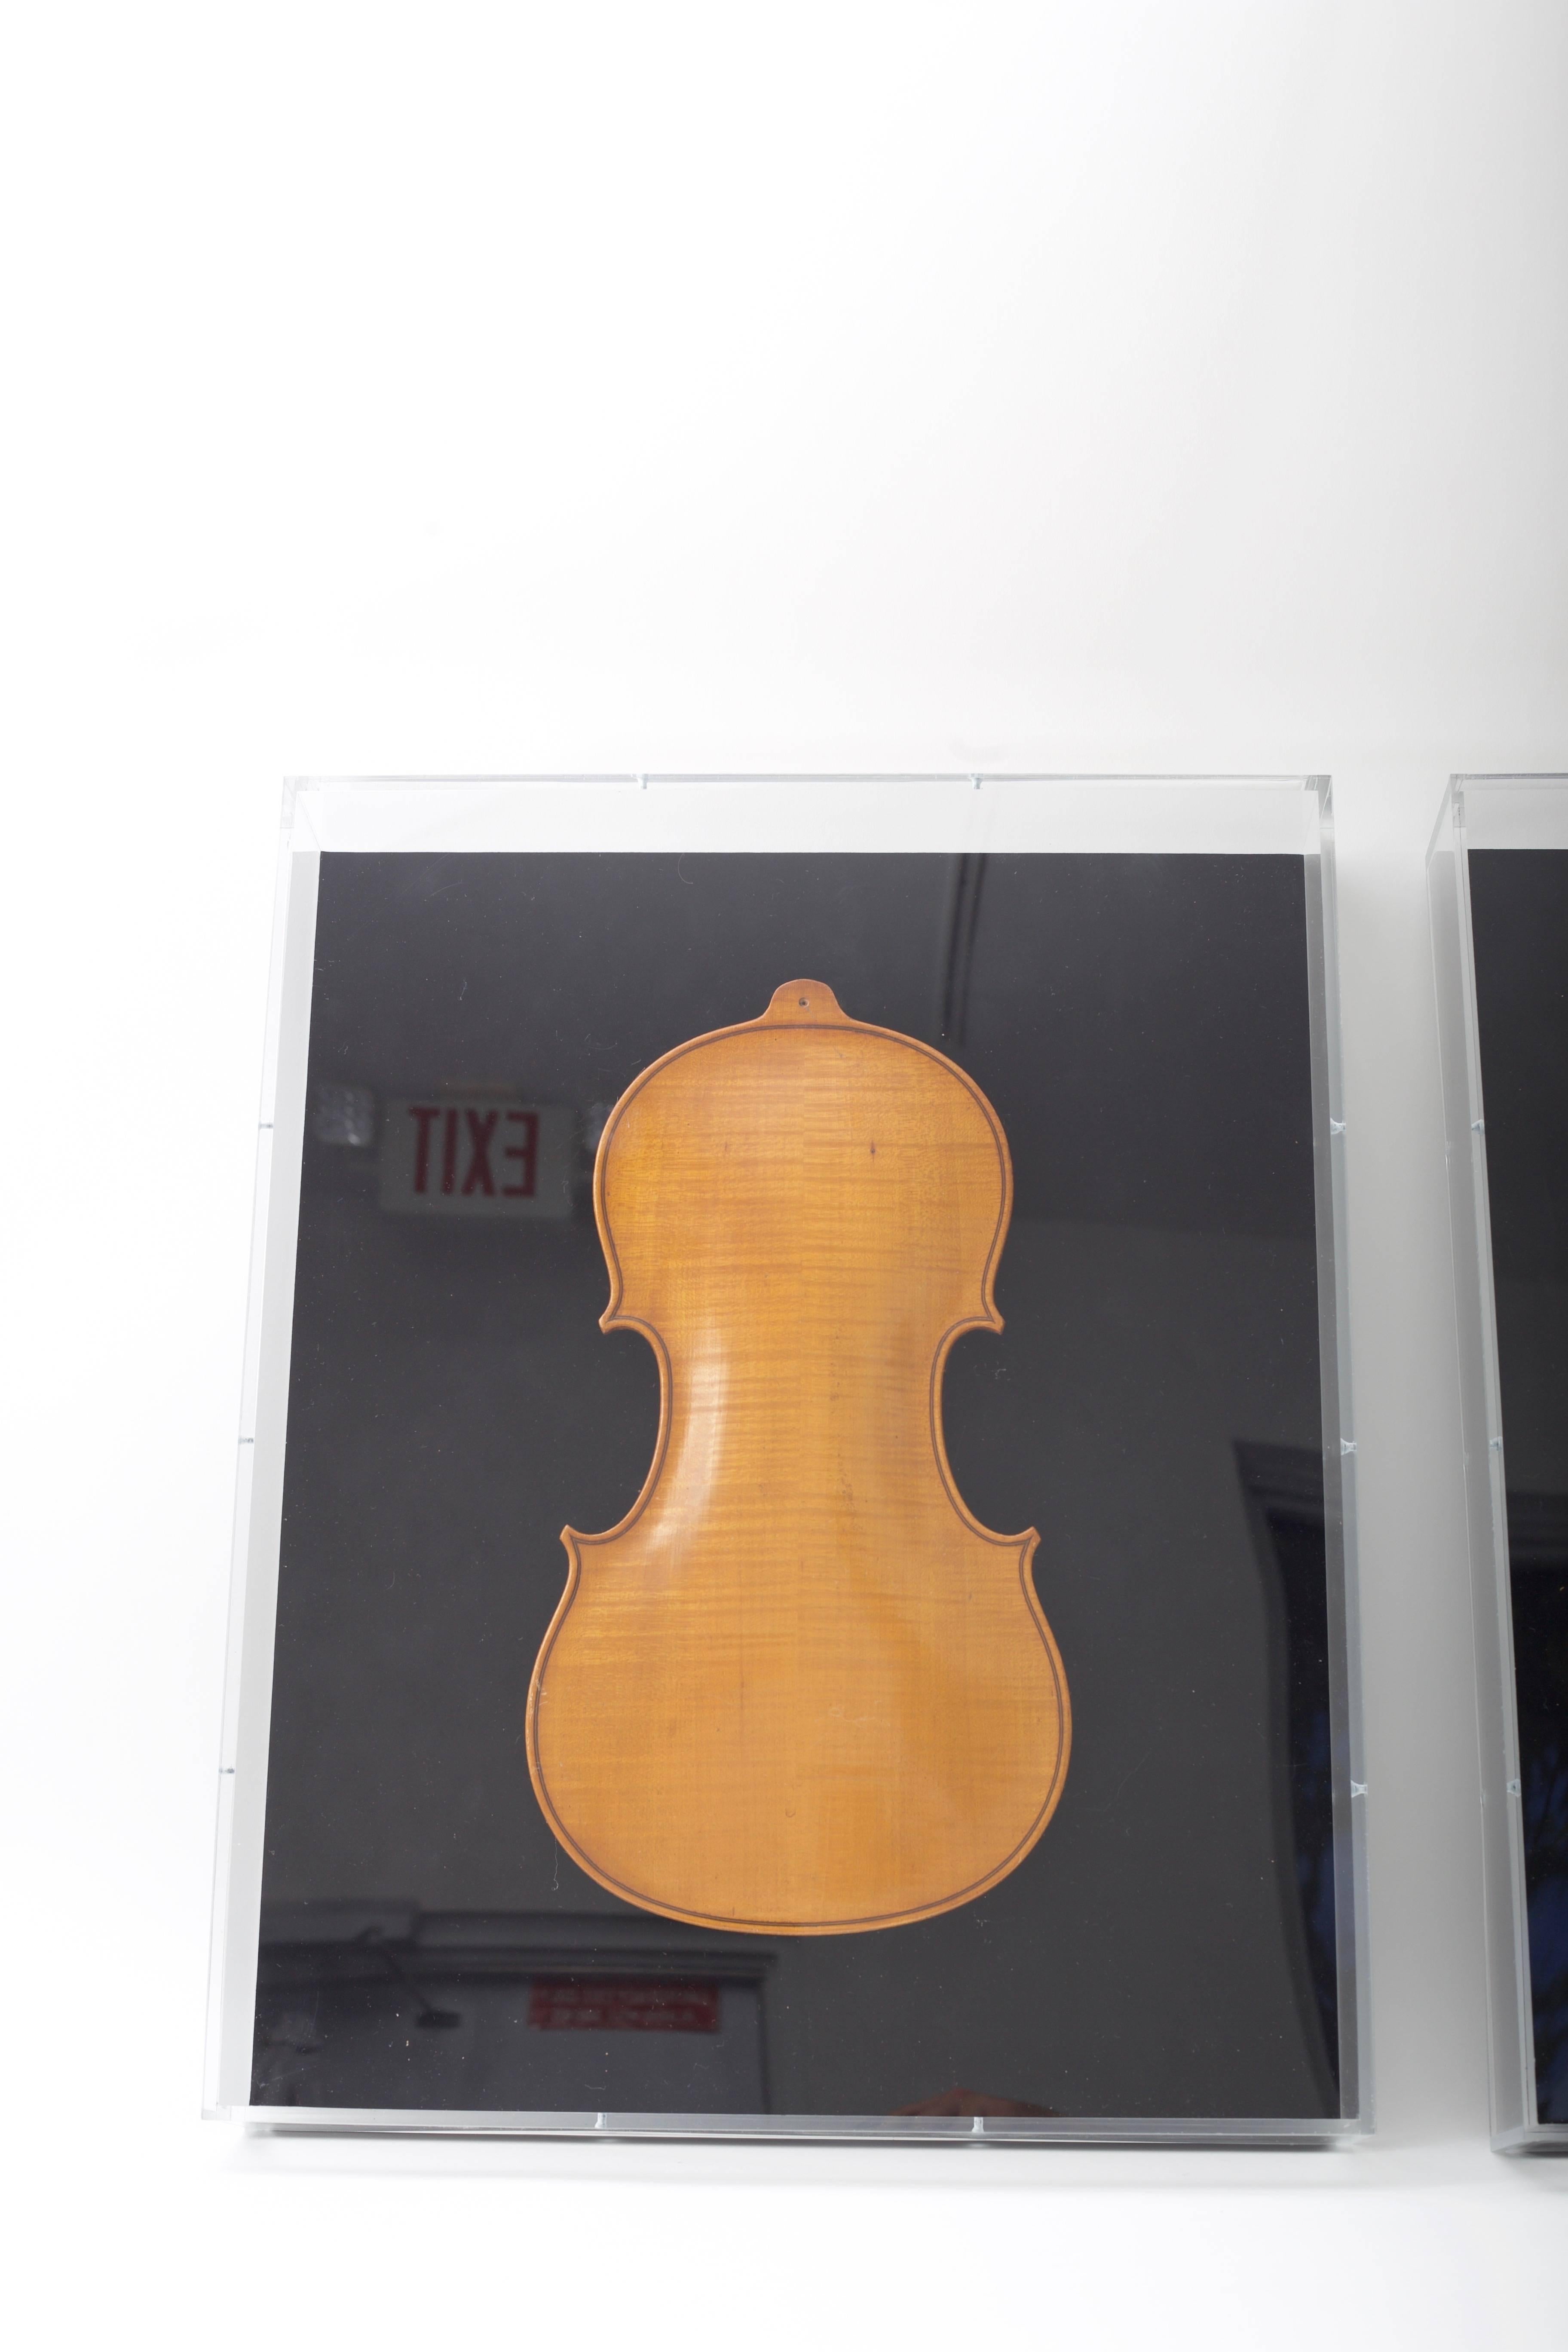 These framed violin backs are the perfect compliment to your music room or perhaps library.
 
Note: Dimensions of violin backs are 14.75